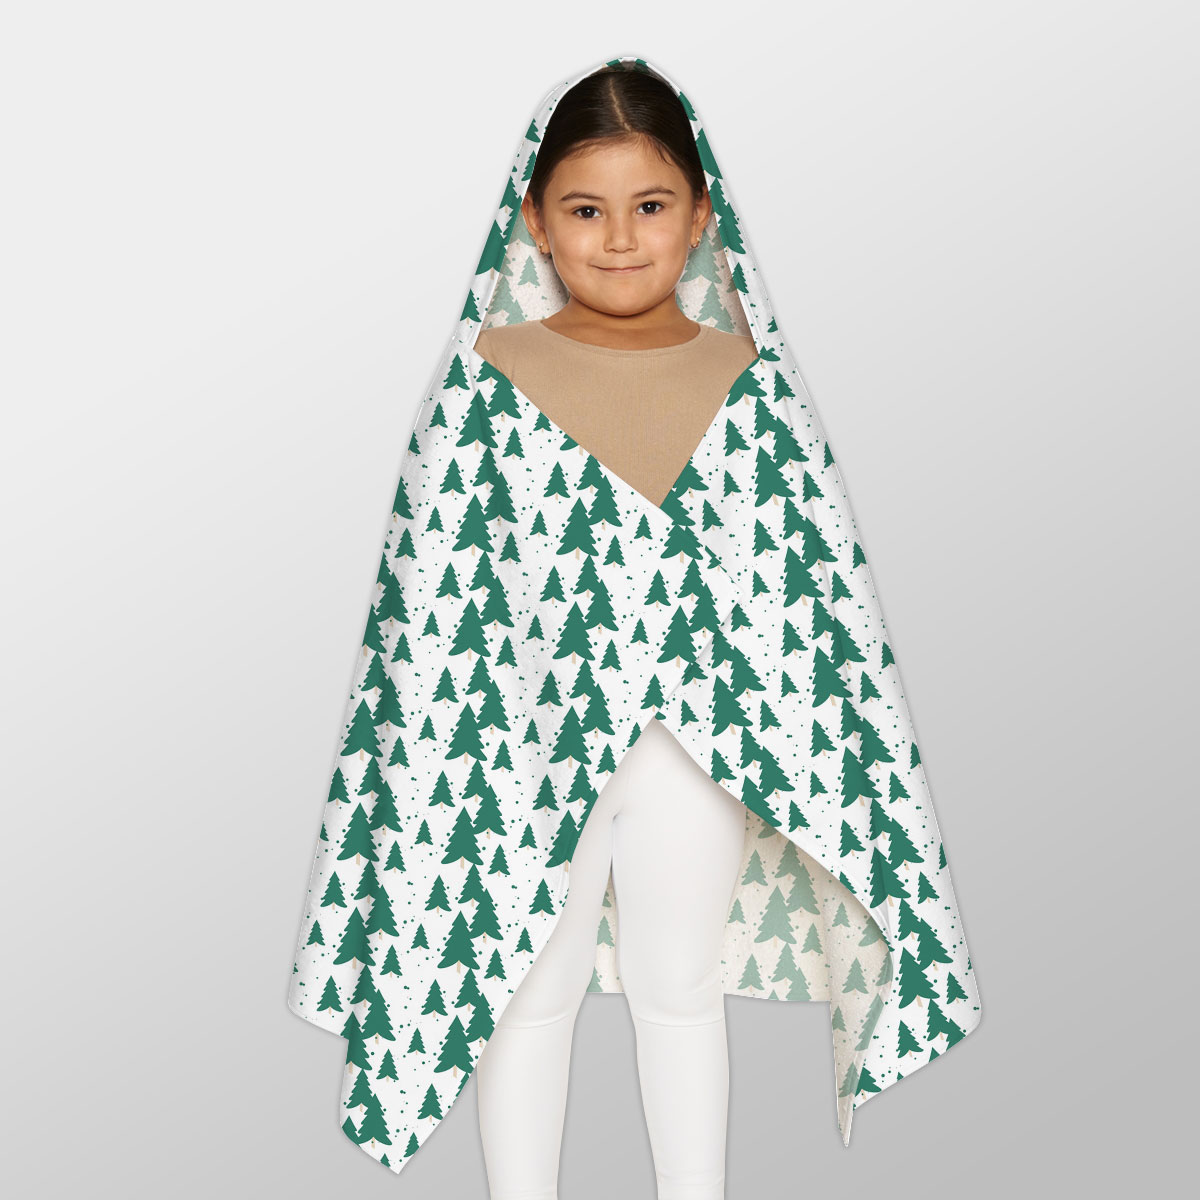 White And Green Christmas Tree Youth Hooded Towel